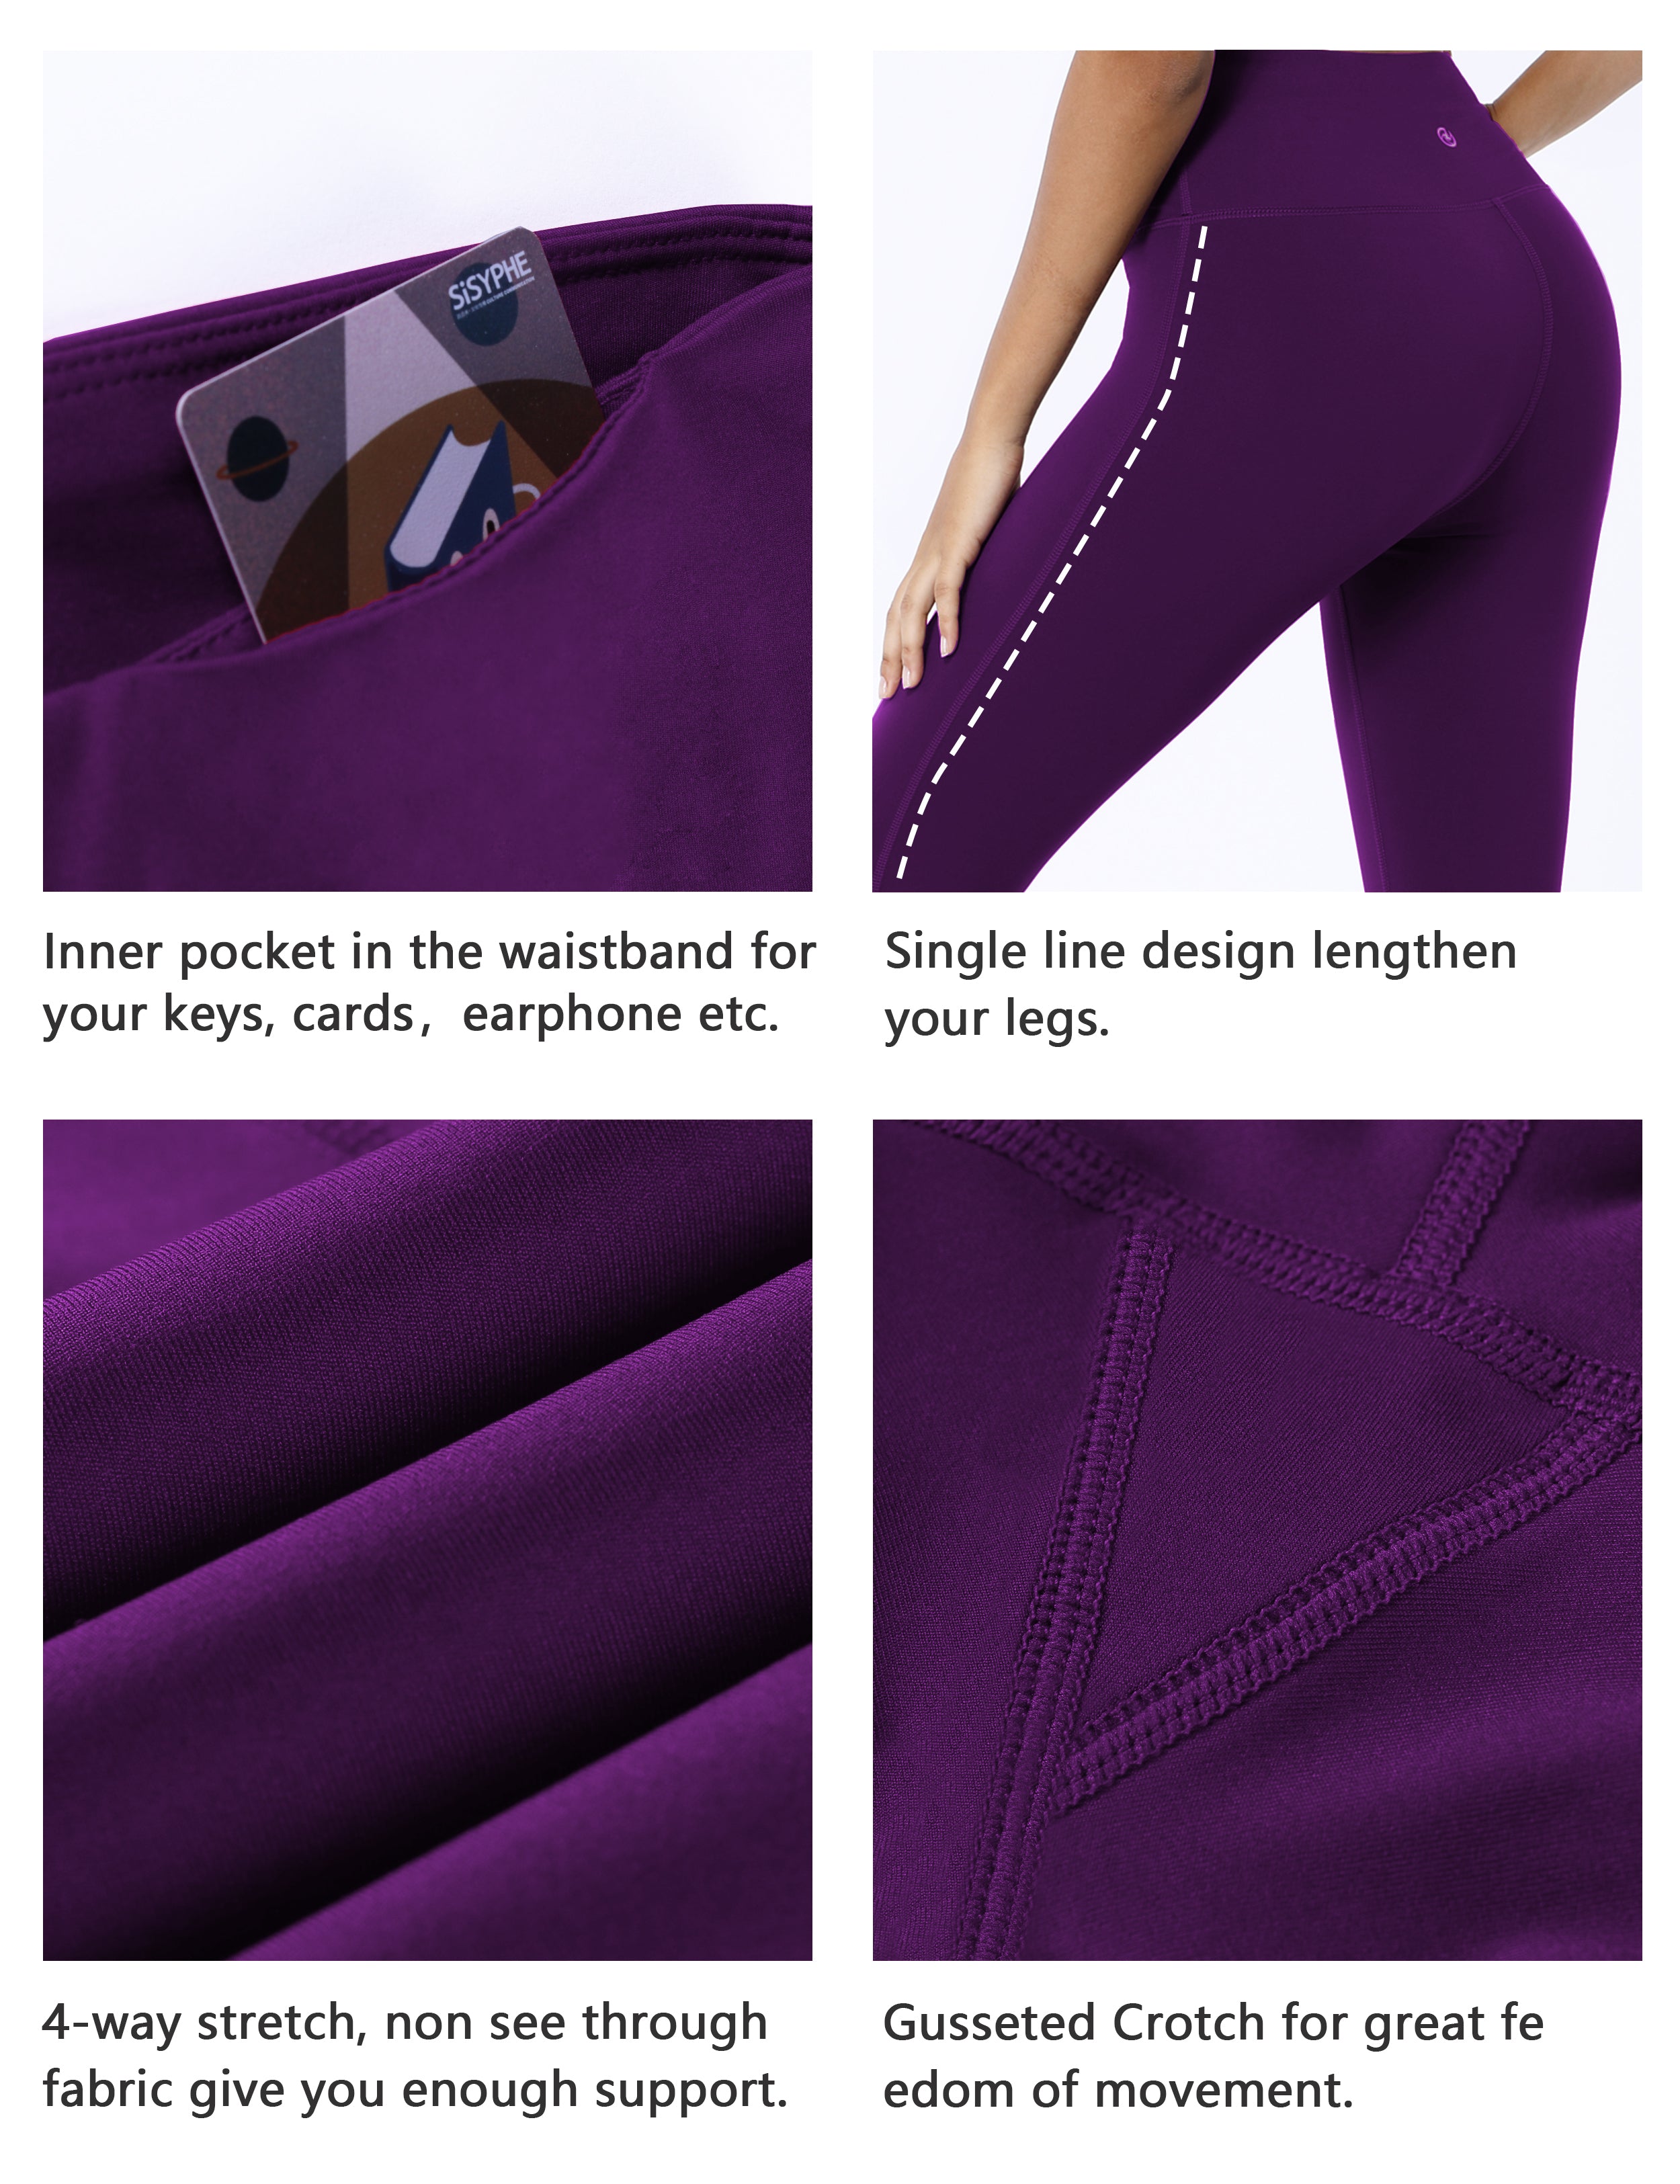 High Waist Side Line Yoga Pants eggplantpurple Side Line is Make Your Legs Look Longer and Thinner 75%Nylon/25%Spandex Fabric doesn't attract lint easily 4-way stretch No see-through Moisture-wicking Tummy control Inner pocket Two lengths